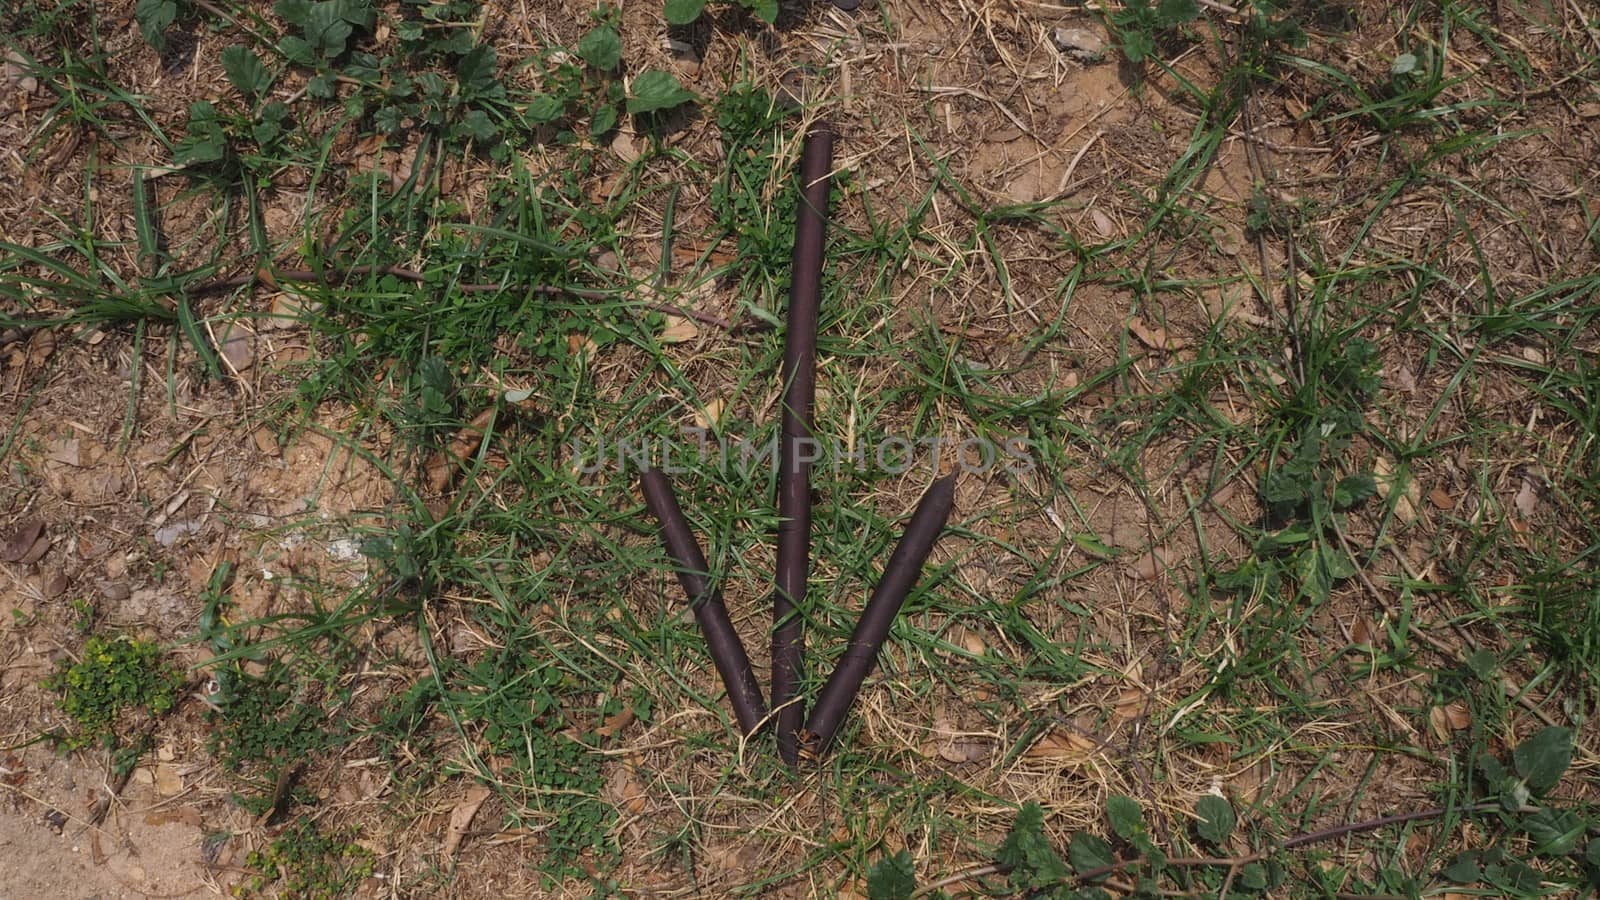 stick and grass arrow pointing down for survival skills or bushcraft or military sign, direction or signal by AndrewUK